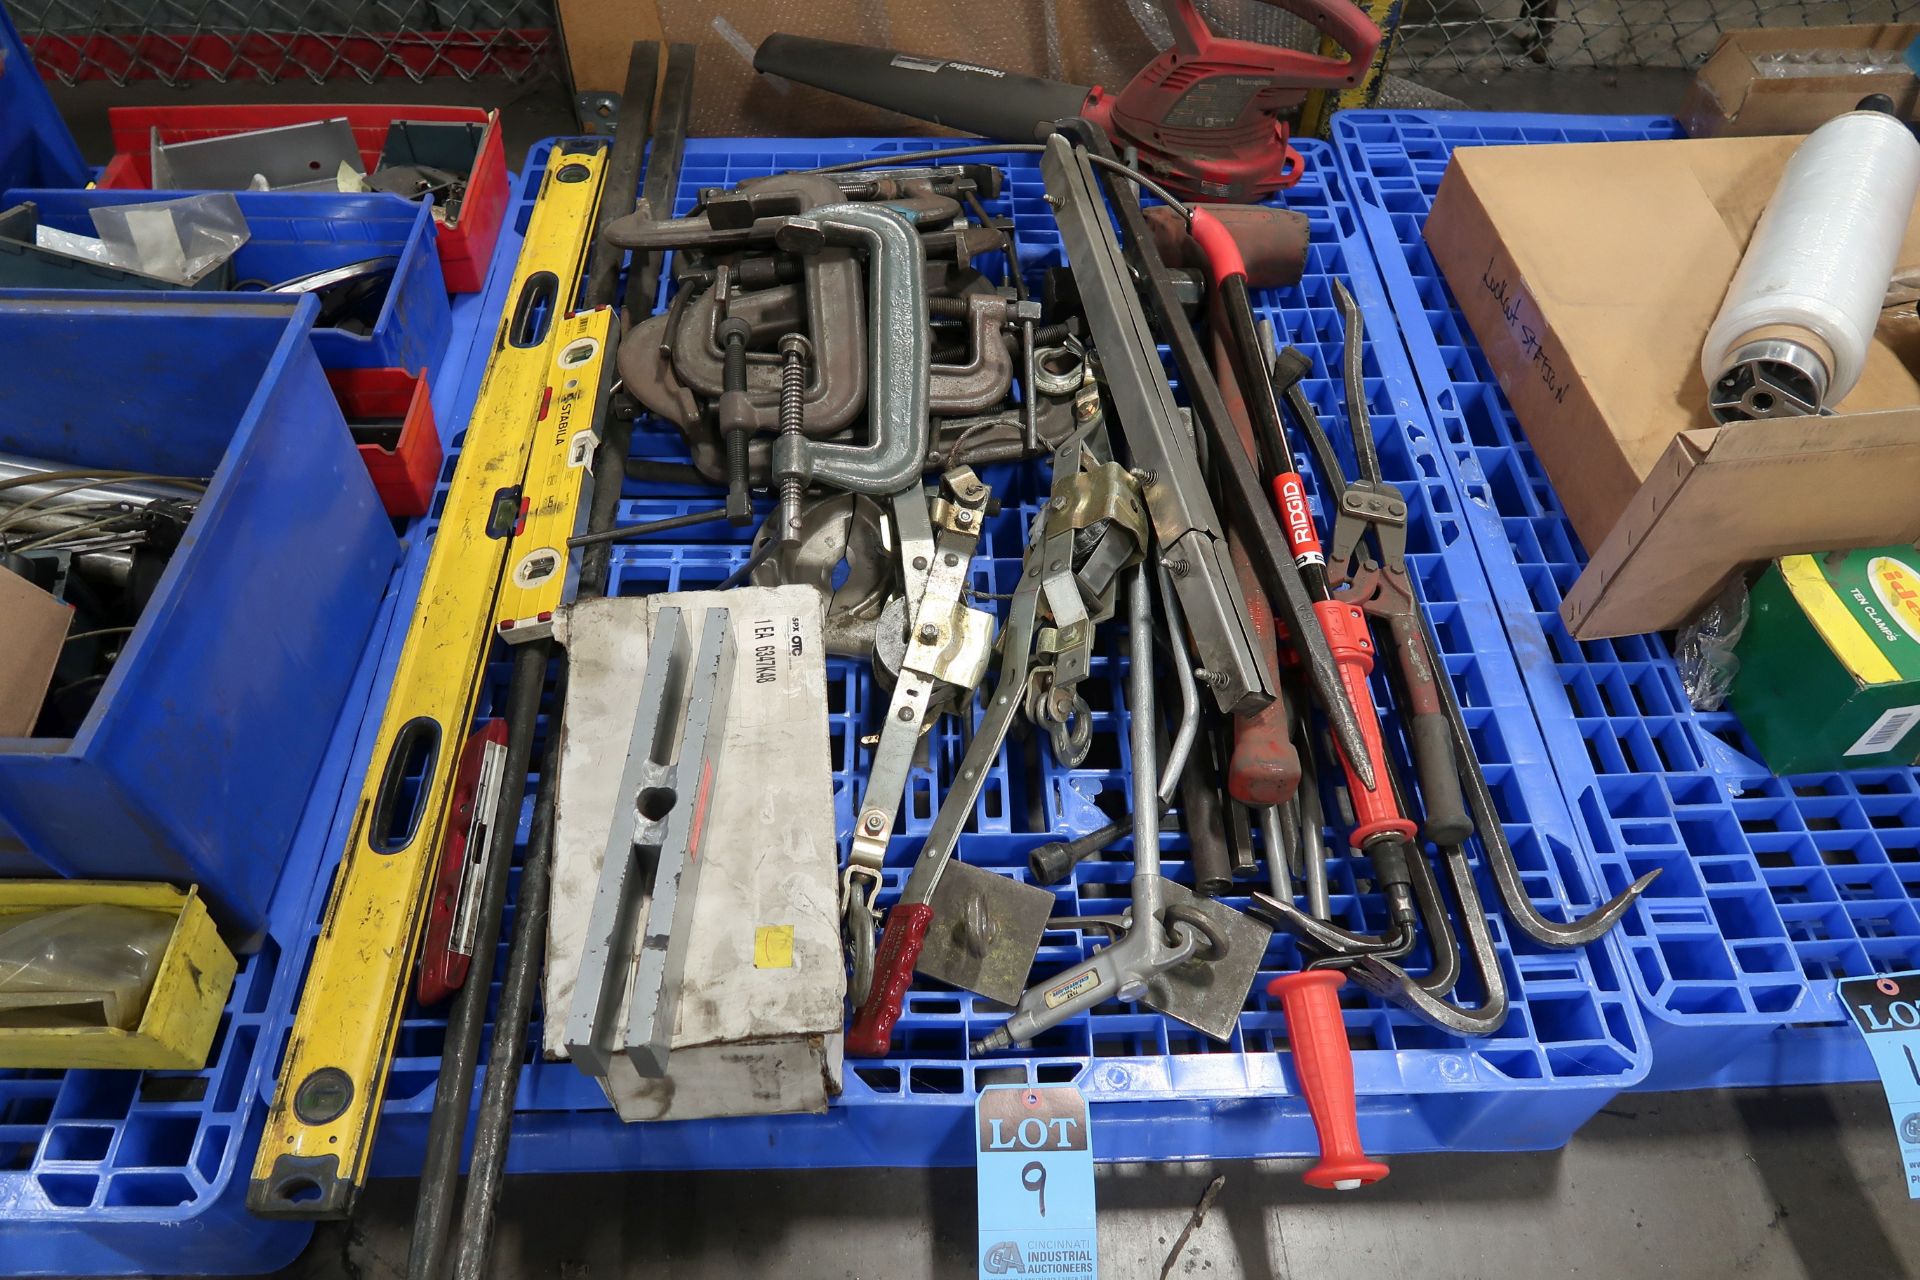 (LOT) SKID OF (15) C-CLAMPS, (2) COME-A-LONGS, PRY BARS, LEVELS, HAMELITE ELECTRIC LEAF BLOWER